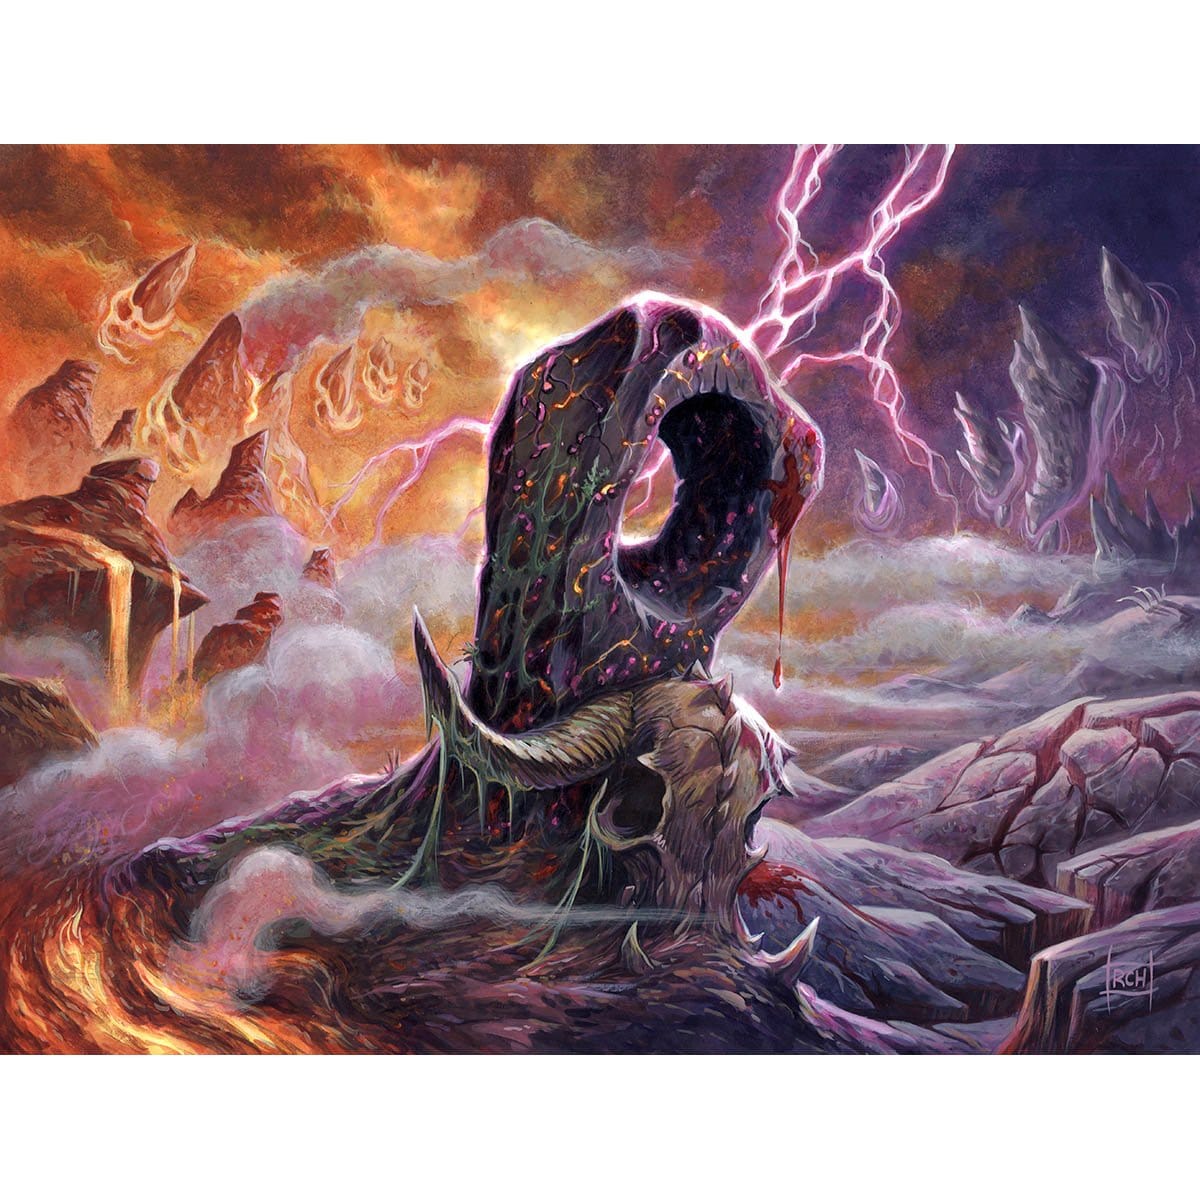 Veinfire Borderpost Print - Print - Original Magic Art - Accessories for Magic the Gathering and other card games